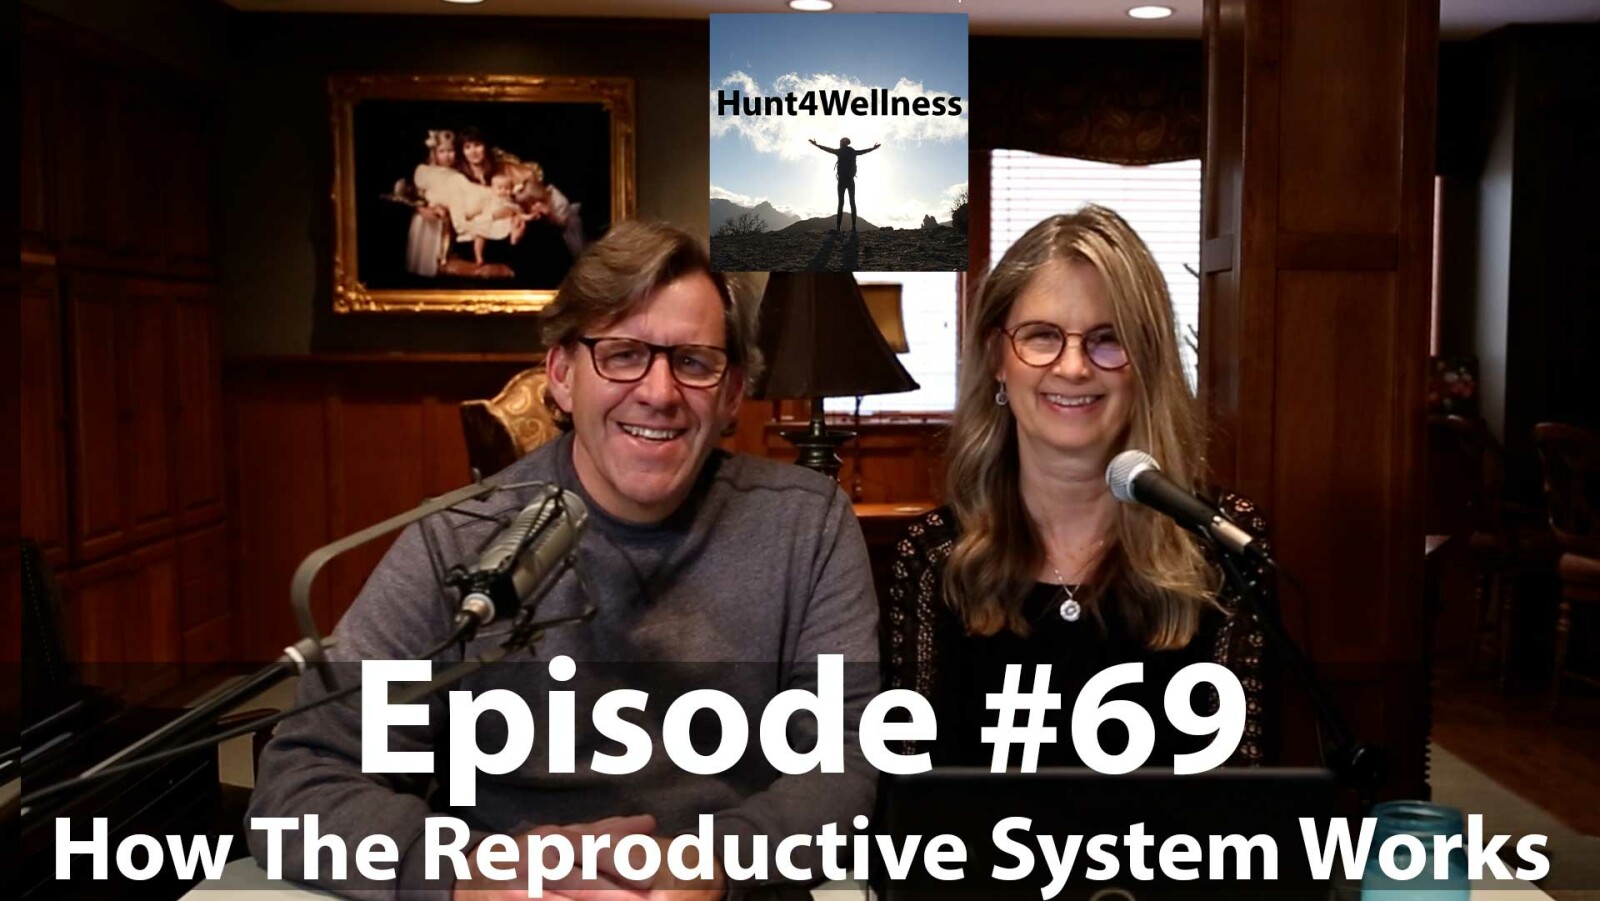 Episode #69 - How The Reproductive System Works